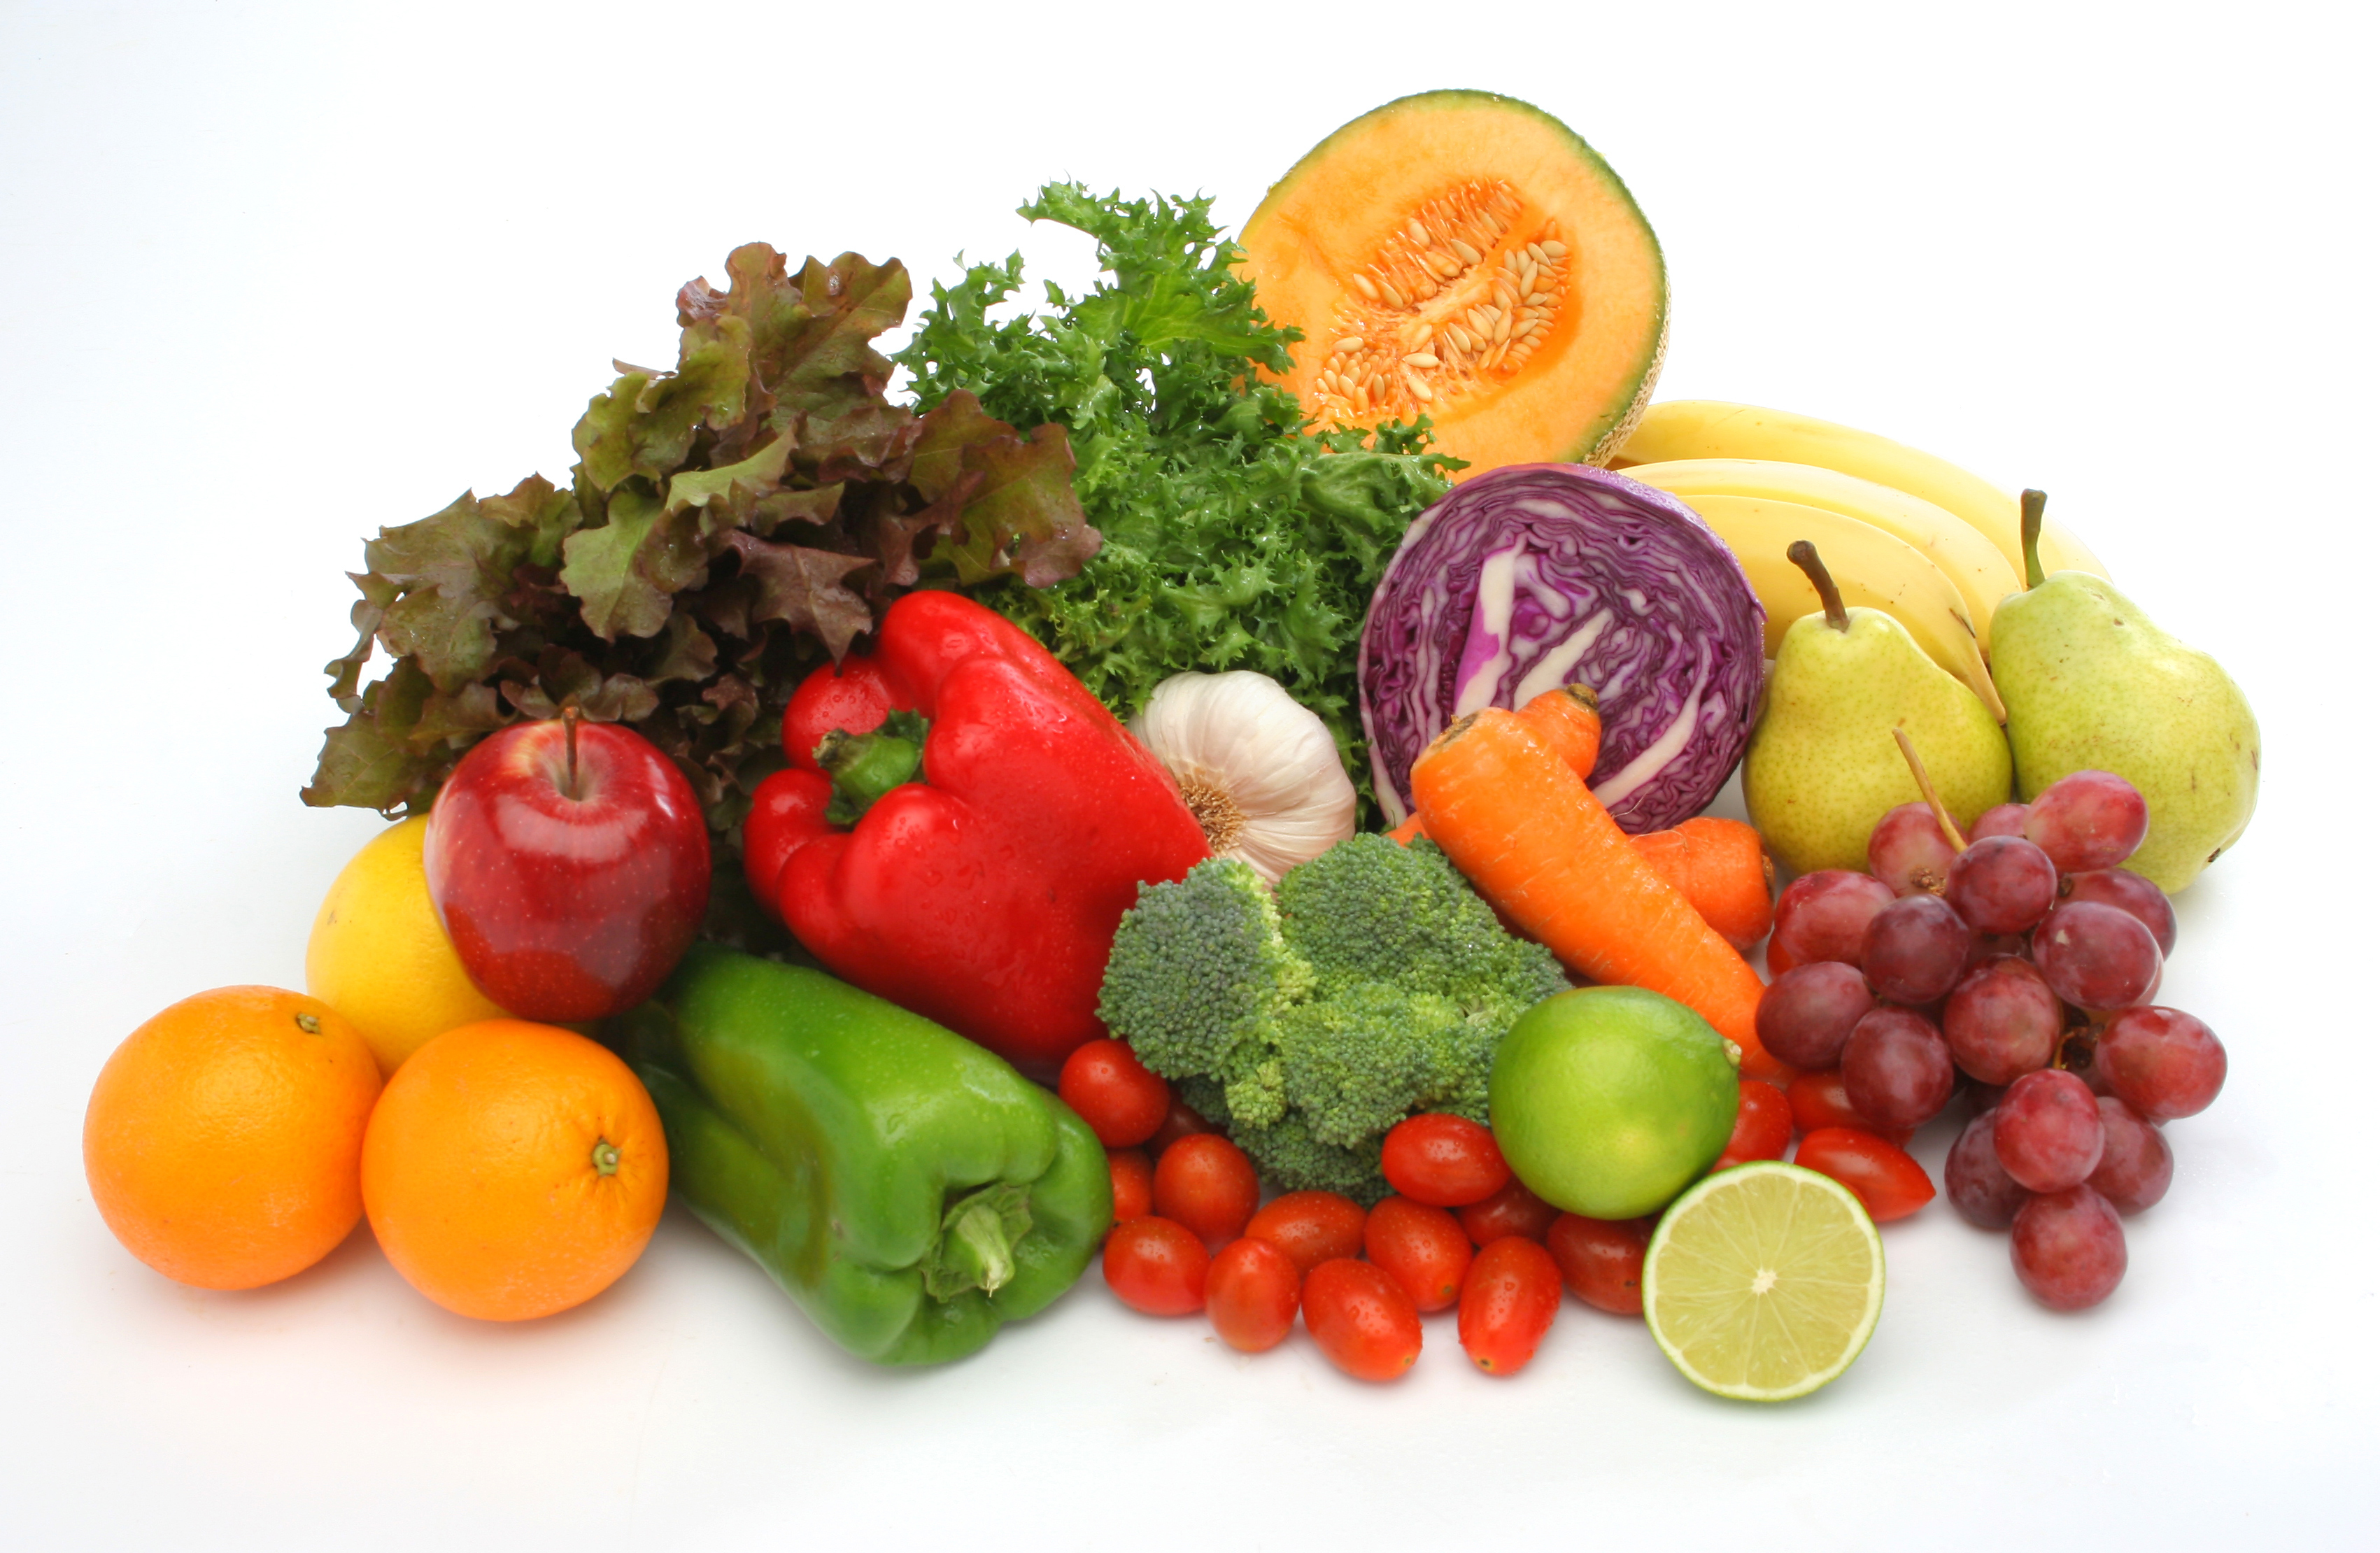 Colorful Fresh Group Of Vegetables And Fruits